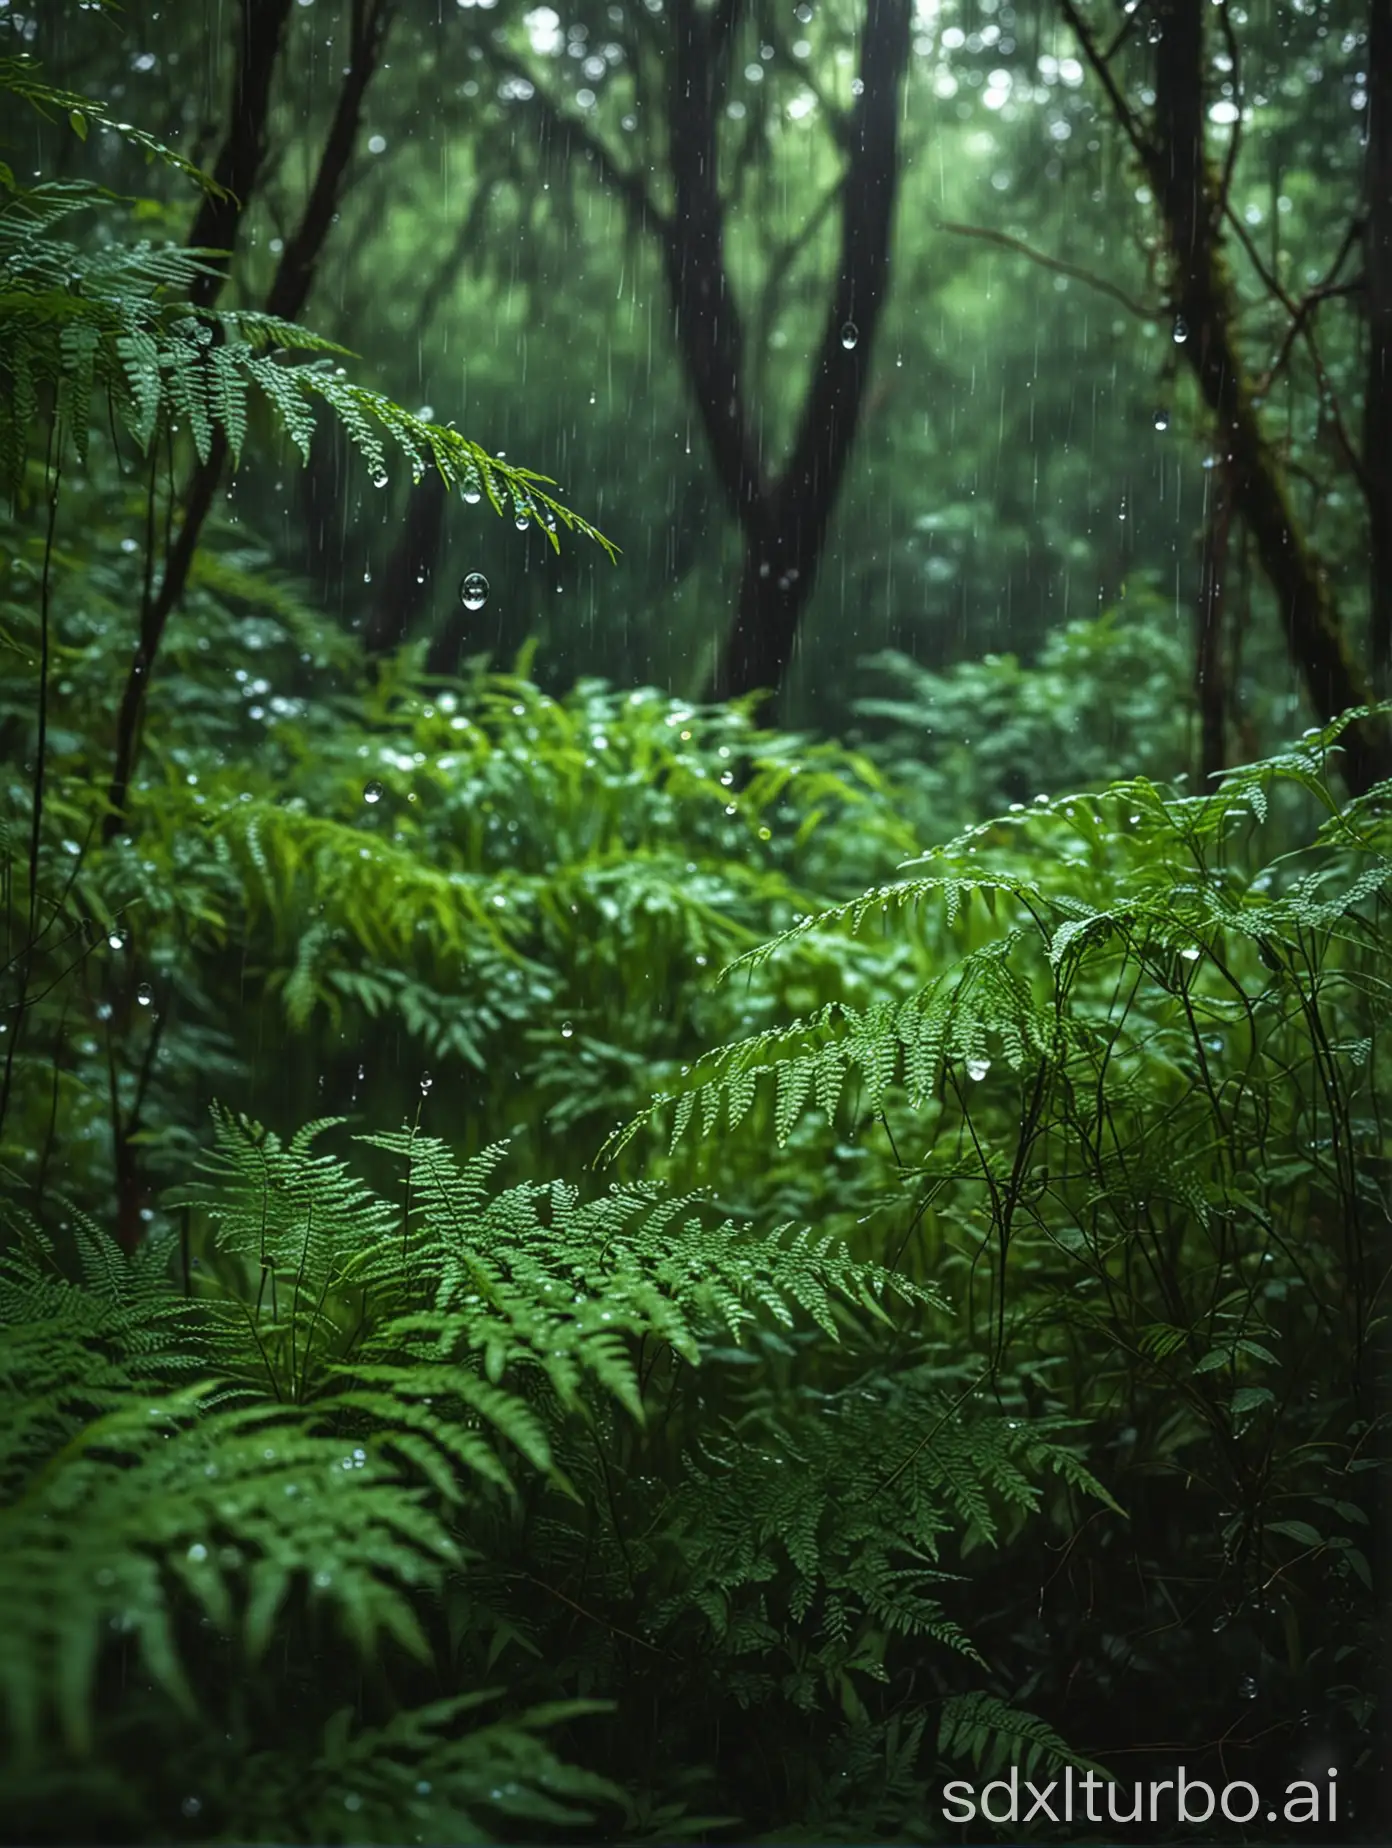 Enchanted-Raindrops-Dance-in-May-Forest